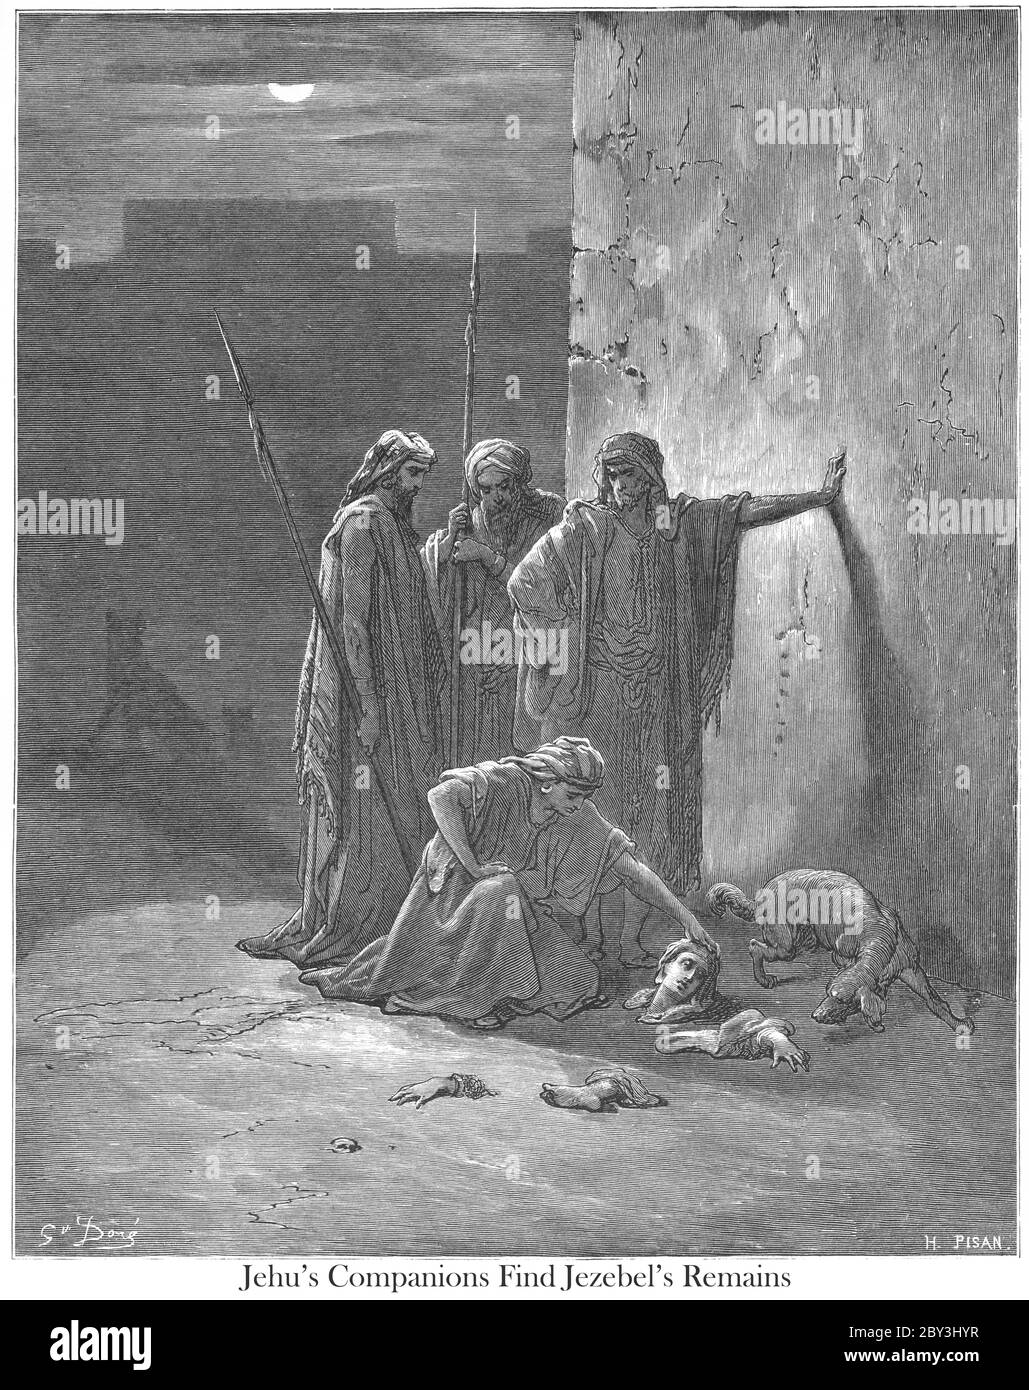 Jehu's Companions Finding the Remains of Jezebel 2 Kings 9:34-35 From the book 'Bible Gallery' Illustrated by Gustave Dore with Memoir of Dore and Descriptive Letter-press by Talbot W. Chambers D.D. Published by Cassell & Company Limited in London and simultaneously by Mame in Tours, France in 1866 Stock Photo